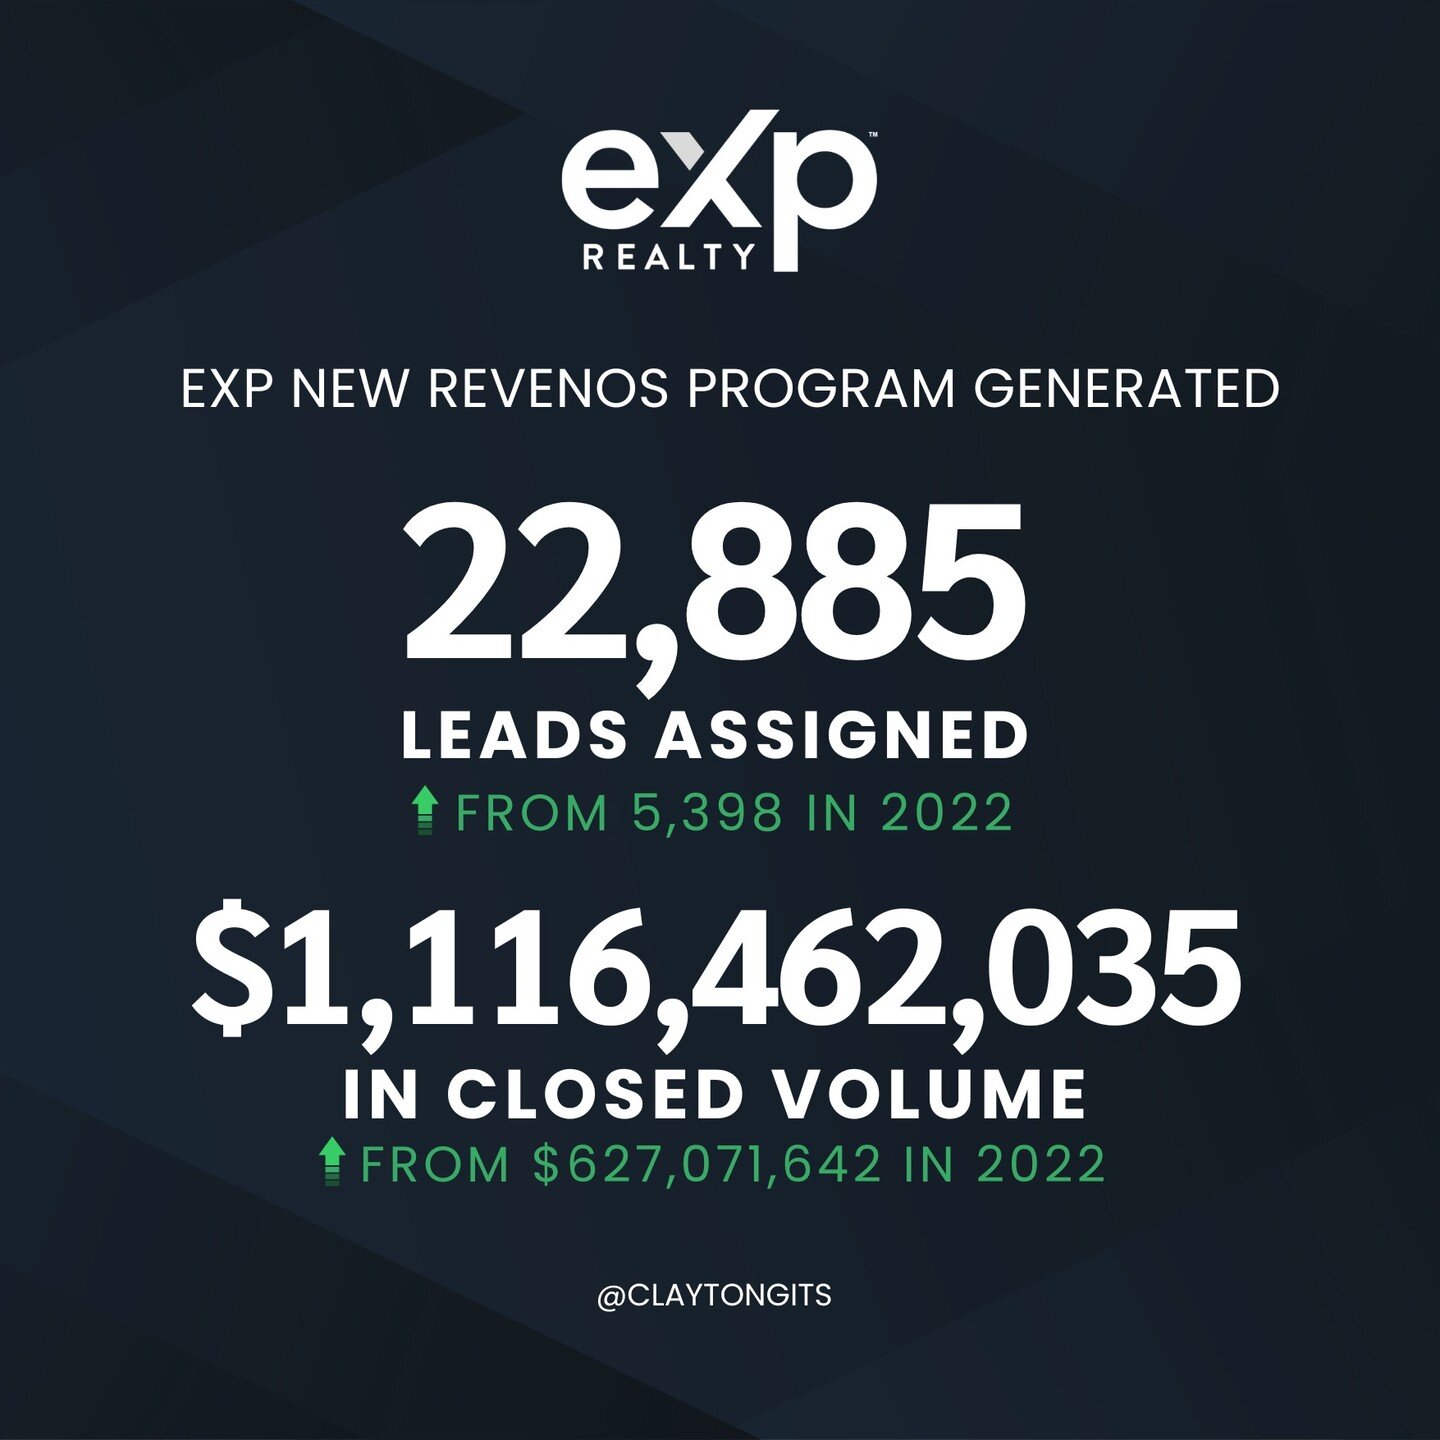 Numbers speak louder than words. Exp Realty's new revenos program CRUSHED it in 2023 and we're just getting warmed up!! 📊
.
.
.
#rva #richmond #exp #exprealty #ExpRealtyMilestone #RealEstateSuccess